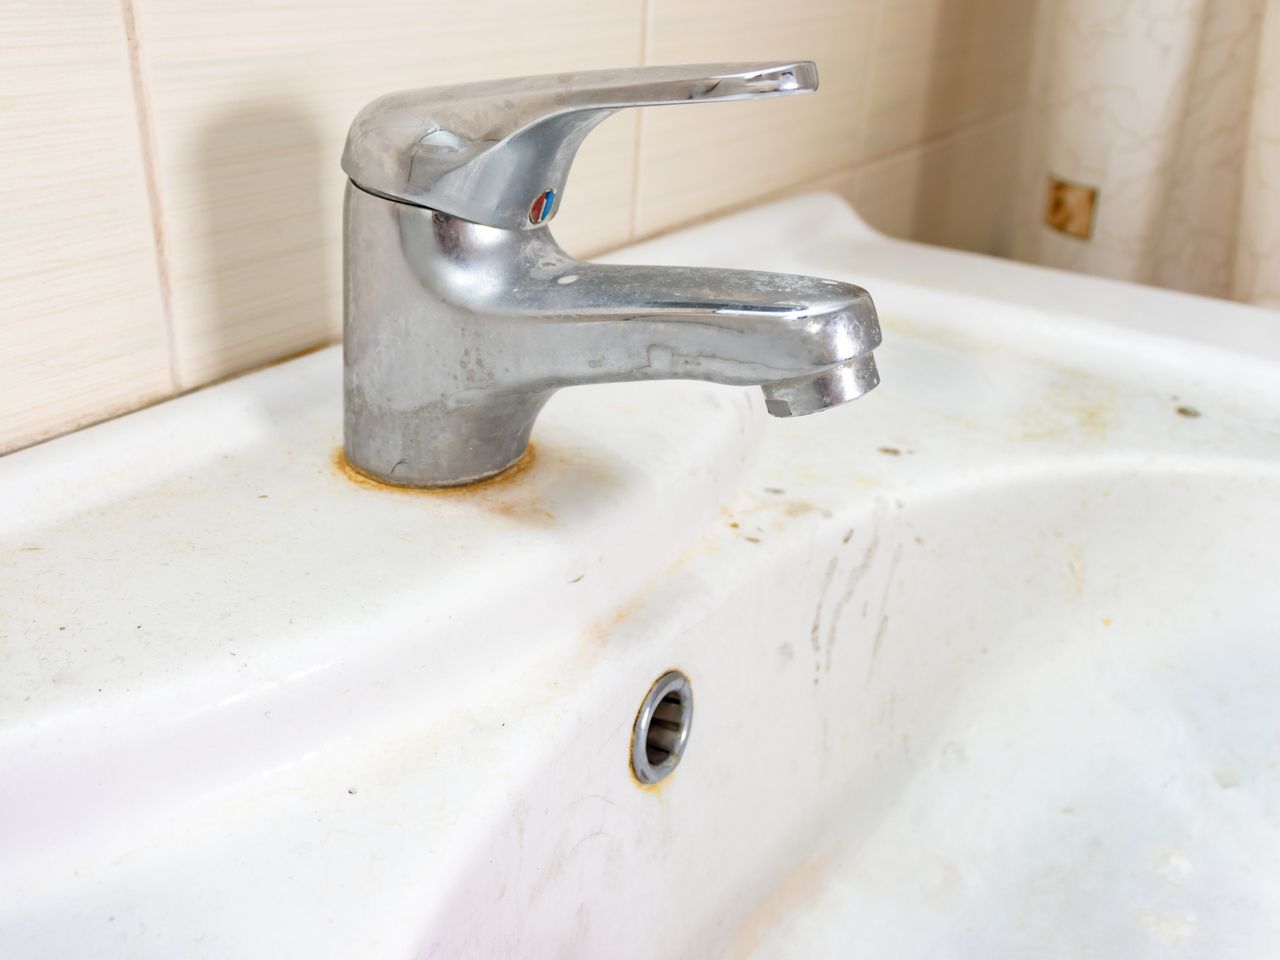 Struggling with limescale? Citric acid can be an inexpensive and effective solution